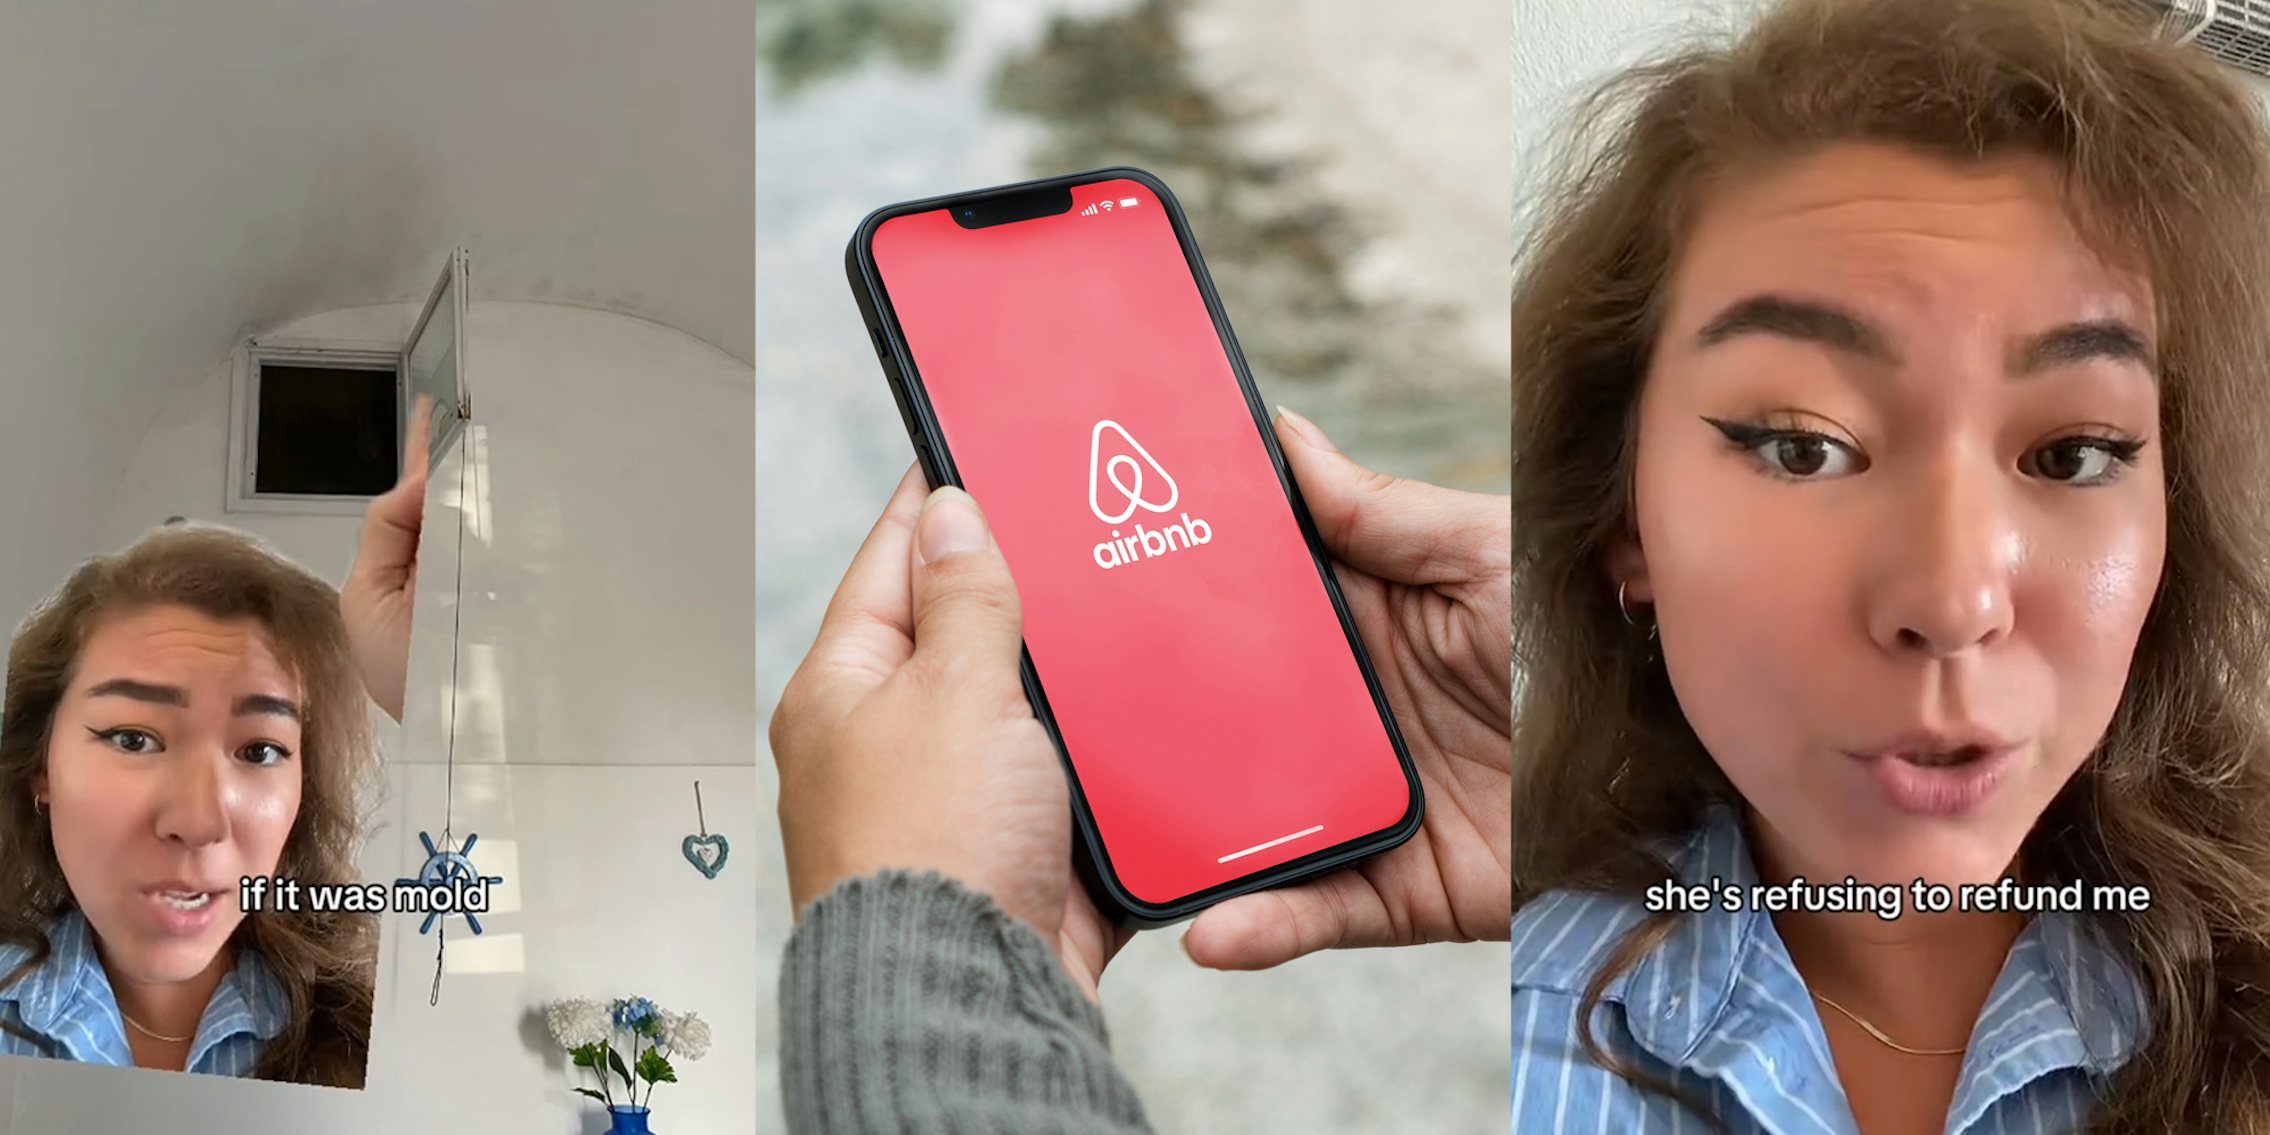 Airbnb guest greenscreen TikTok over image of interior with caption 'if it was mold' (l) Airbnb app open on phone in hand (c) Airbnb guest speaking with caption 'she's refusing to refund me' (r)